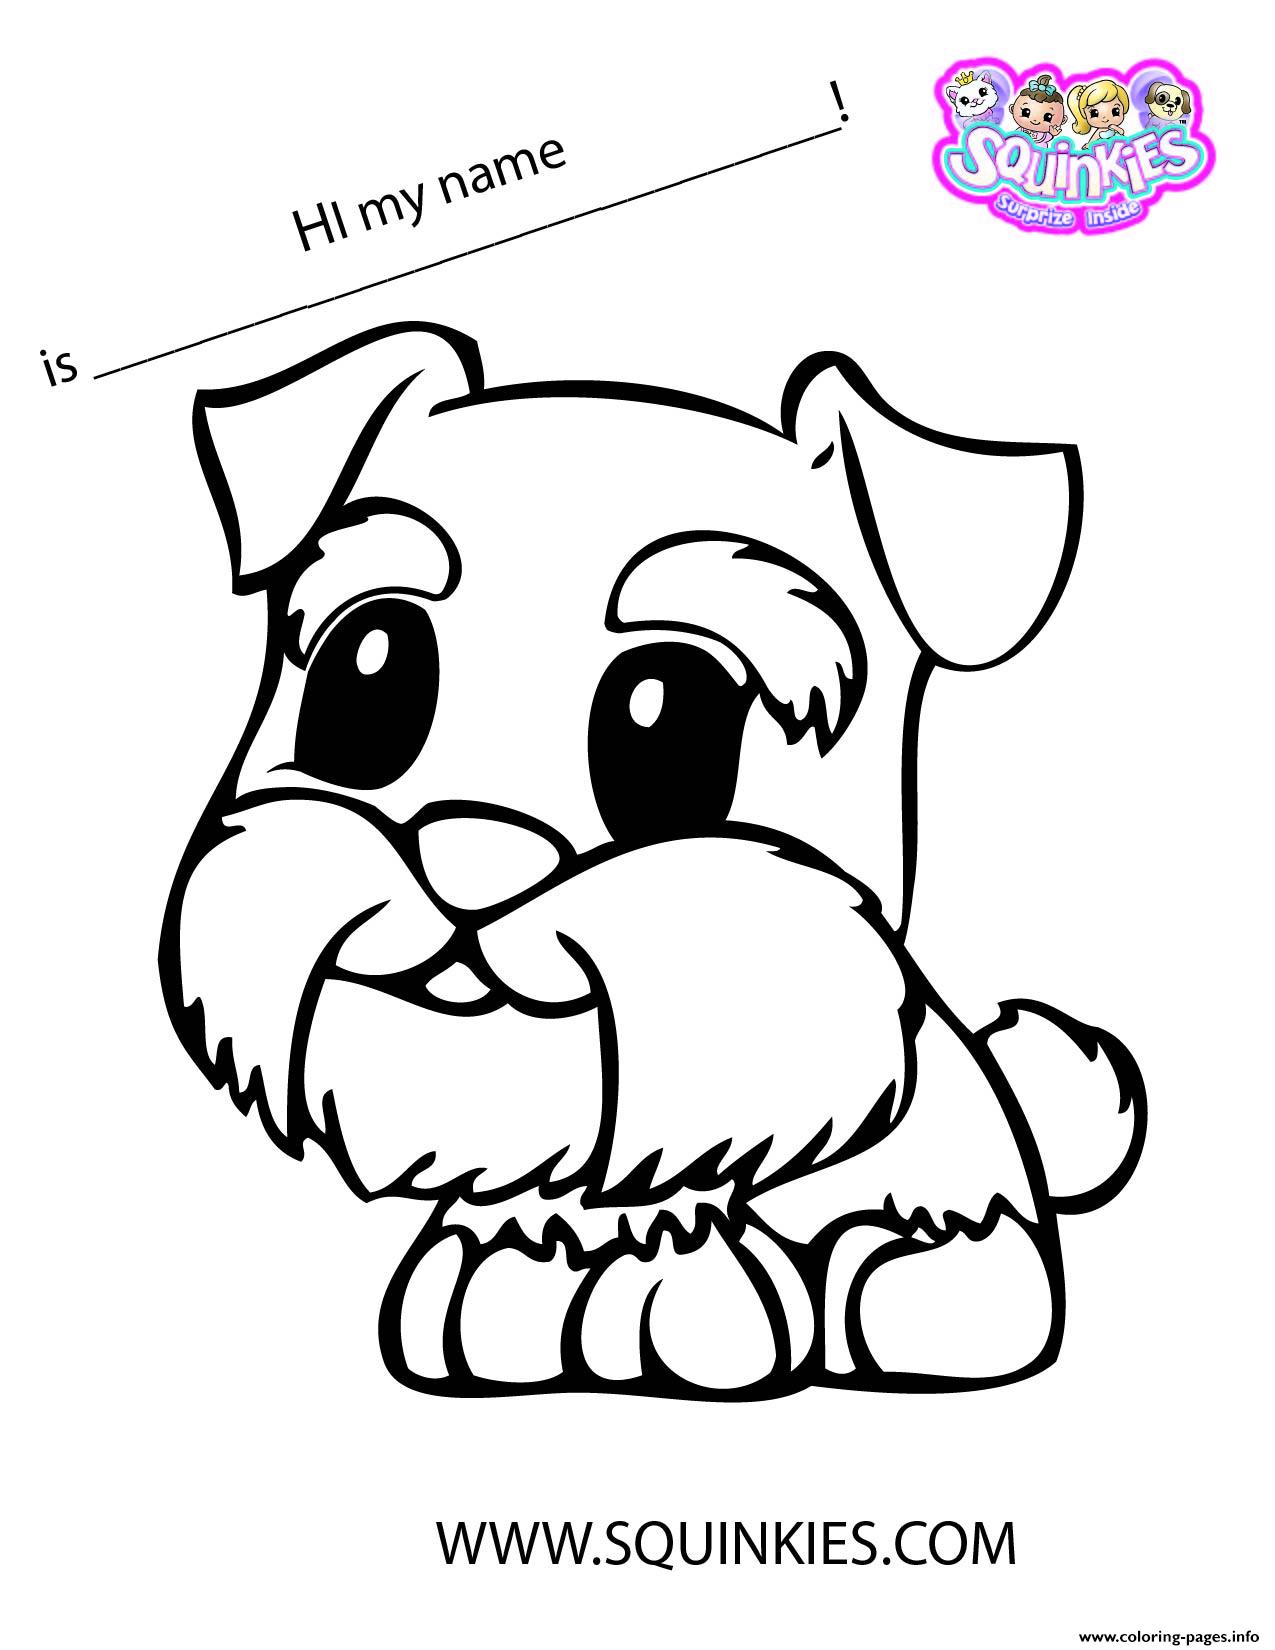 Squinkies Official Cute Dog coloring